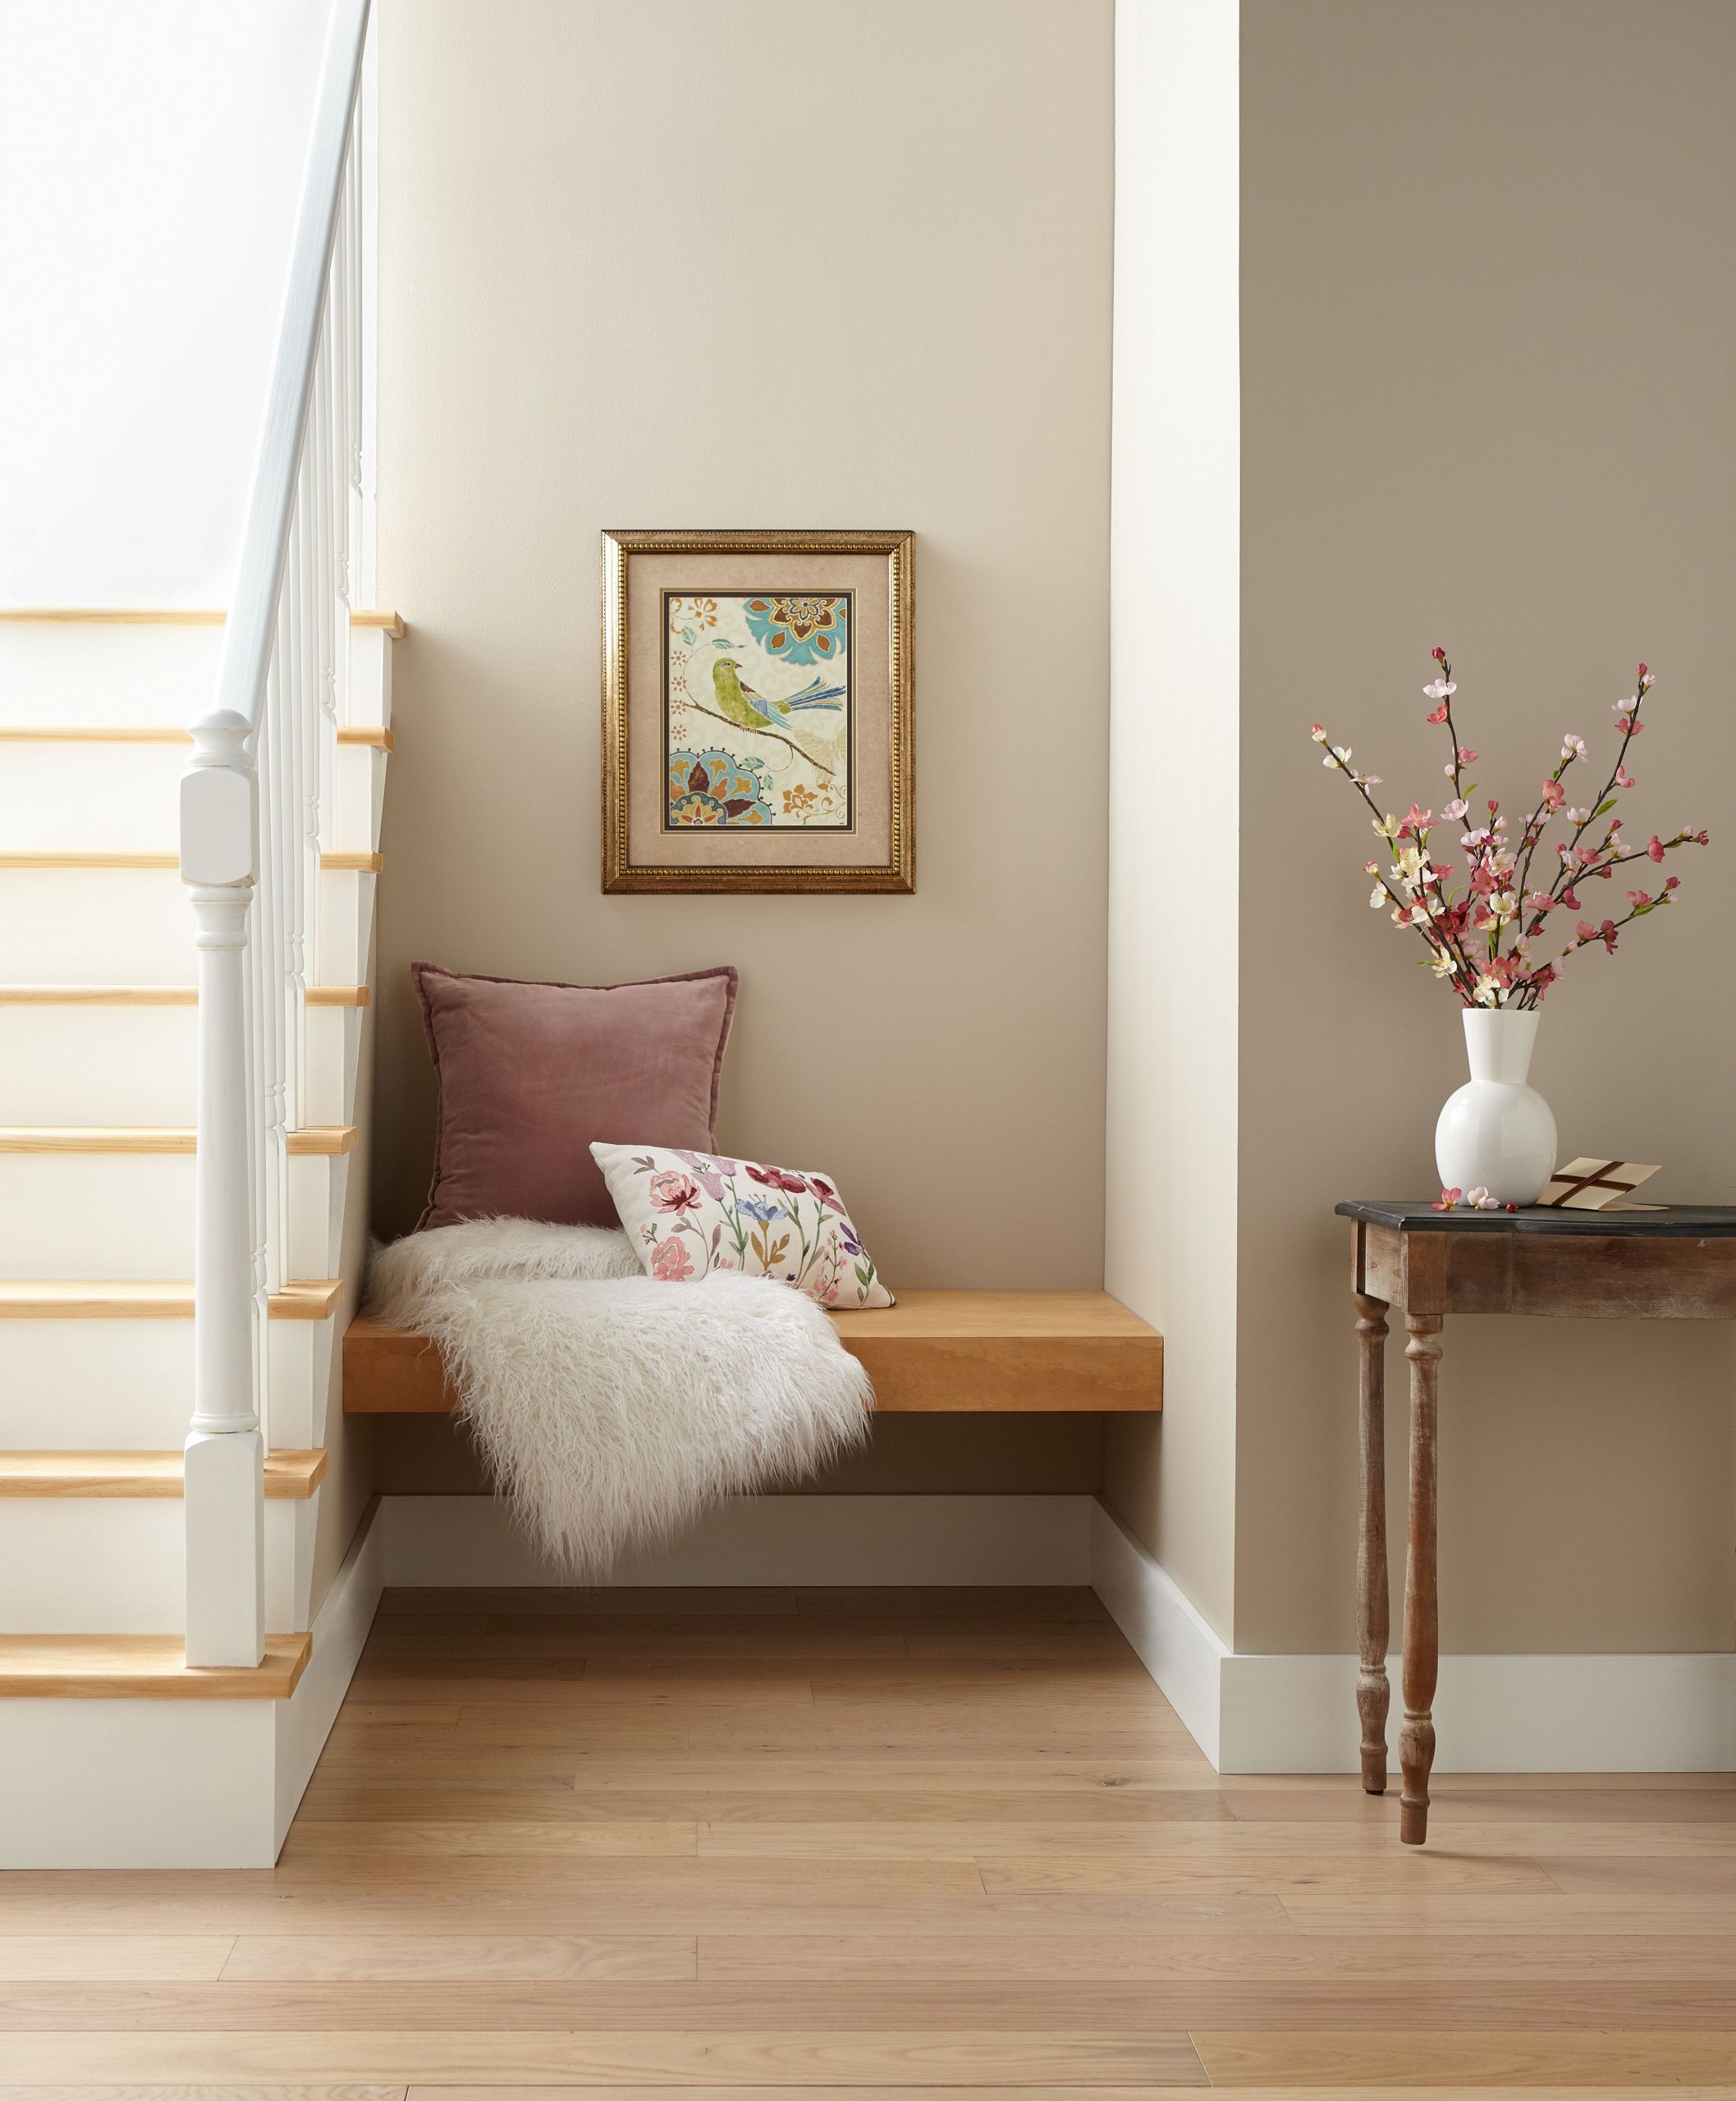 Behr Bedroom Paint Colors
 These Are the Paint Color Trends for 2020 According to Behr